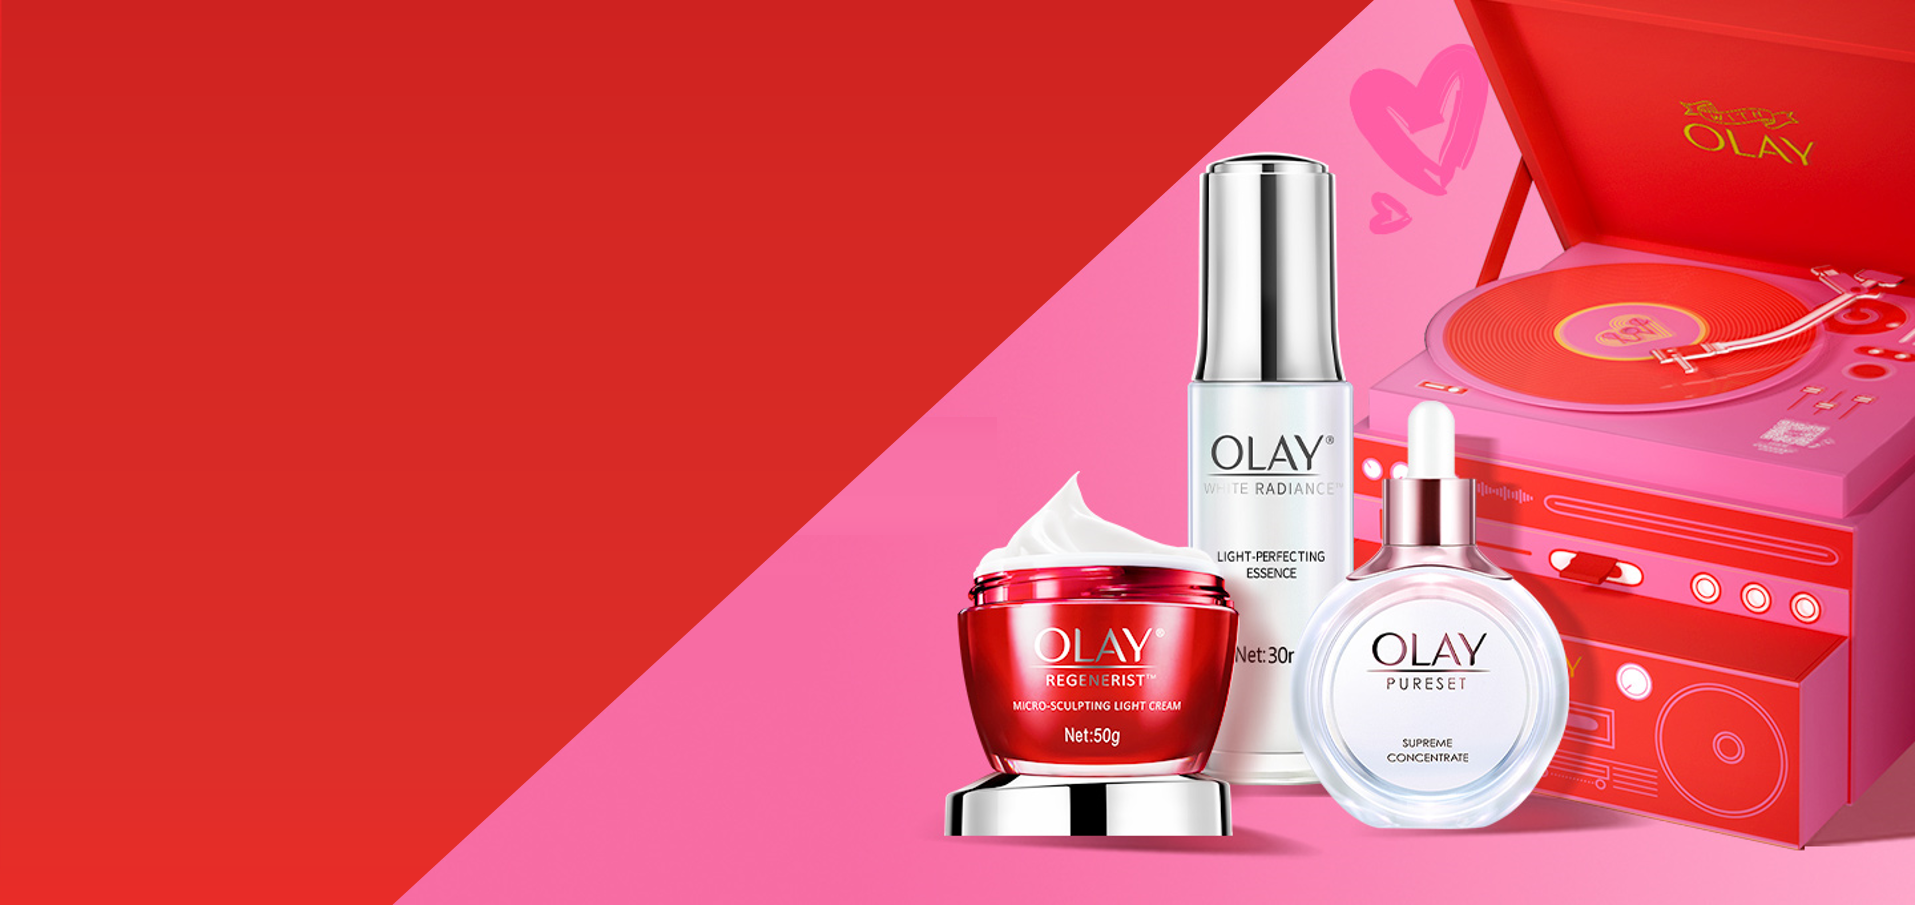 OLAY Collaborates with JD Live to Attract More Young Customers